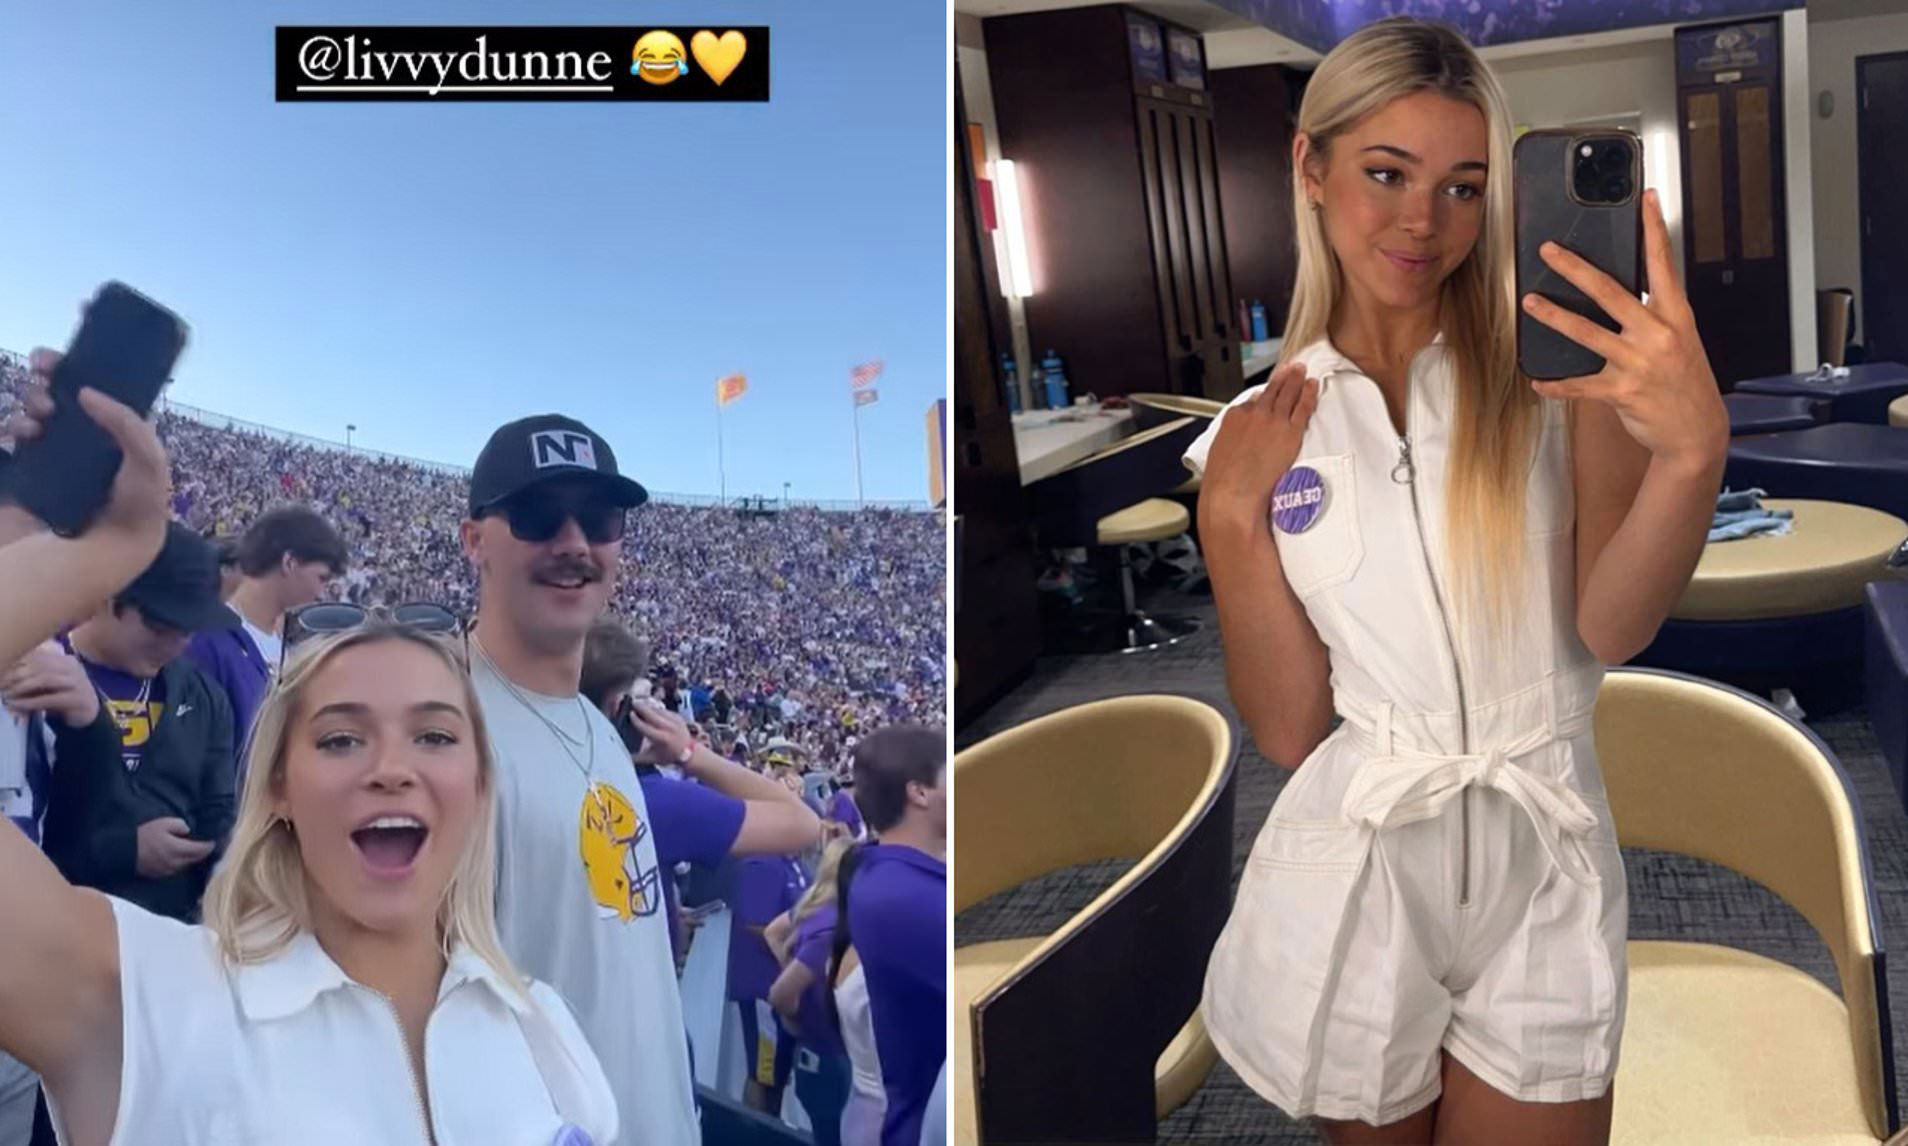 Olivia Dunne holds hands with MLB boyfriend Paul Skenes at LSU game